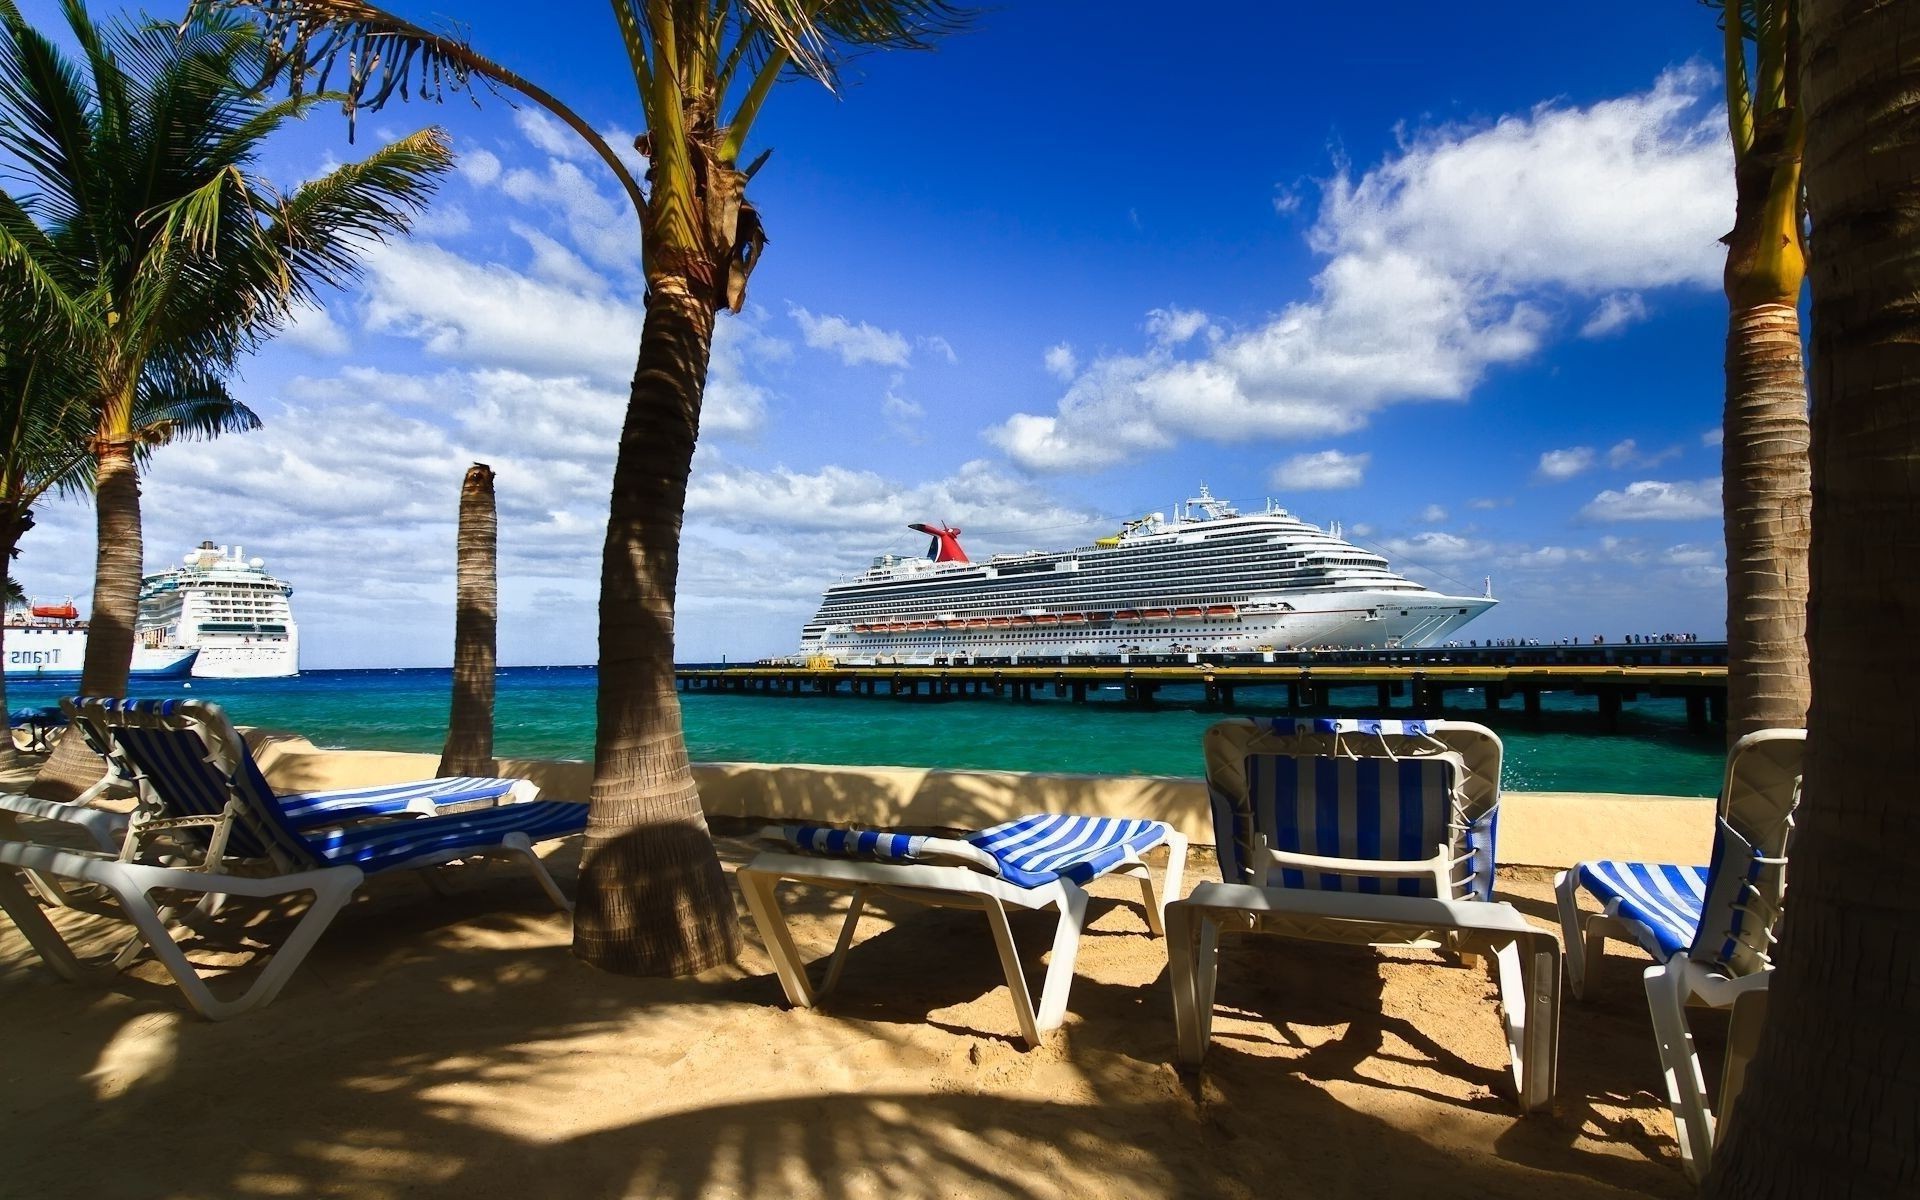 large ships and liners resort beach chair travel tropical vacation palm seashore ocean hotel relaxation water leisure exotic island luxury summer sand paradise